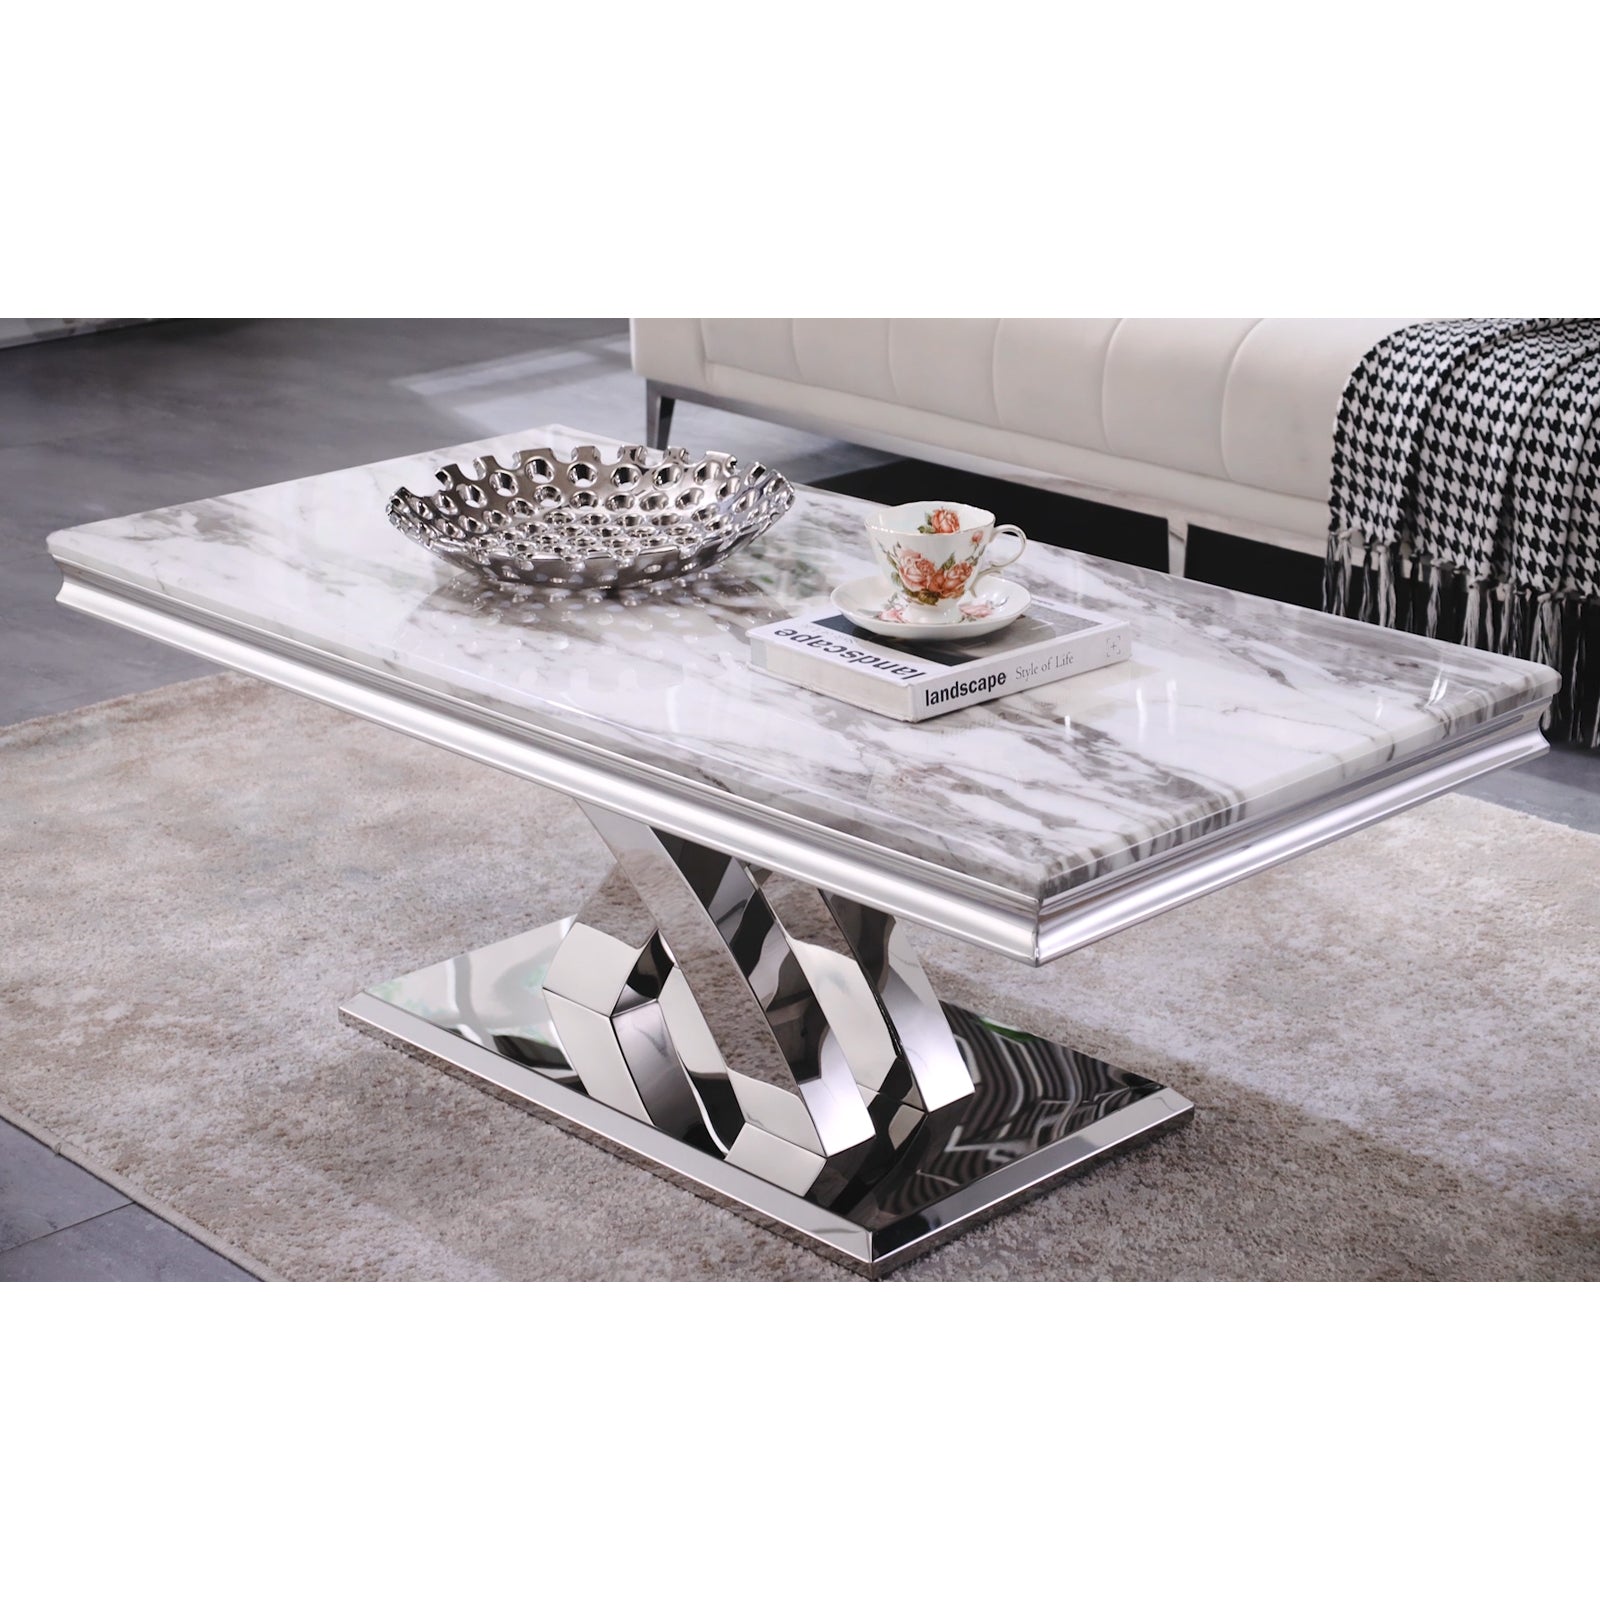 AUZ Coffee Table - The Epitome of Style and Sophistication